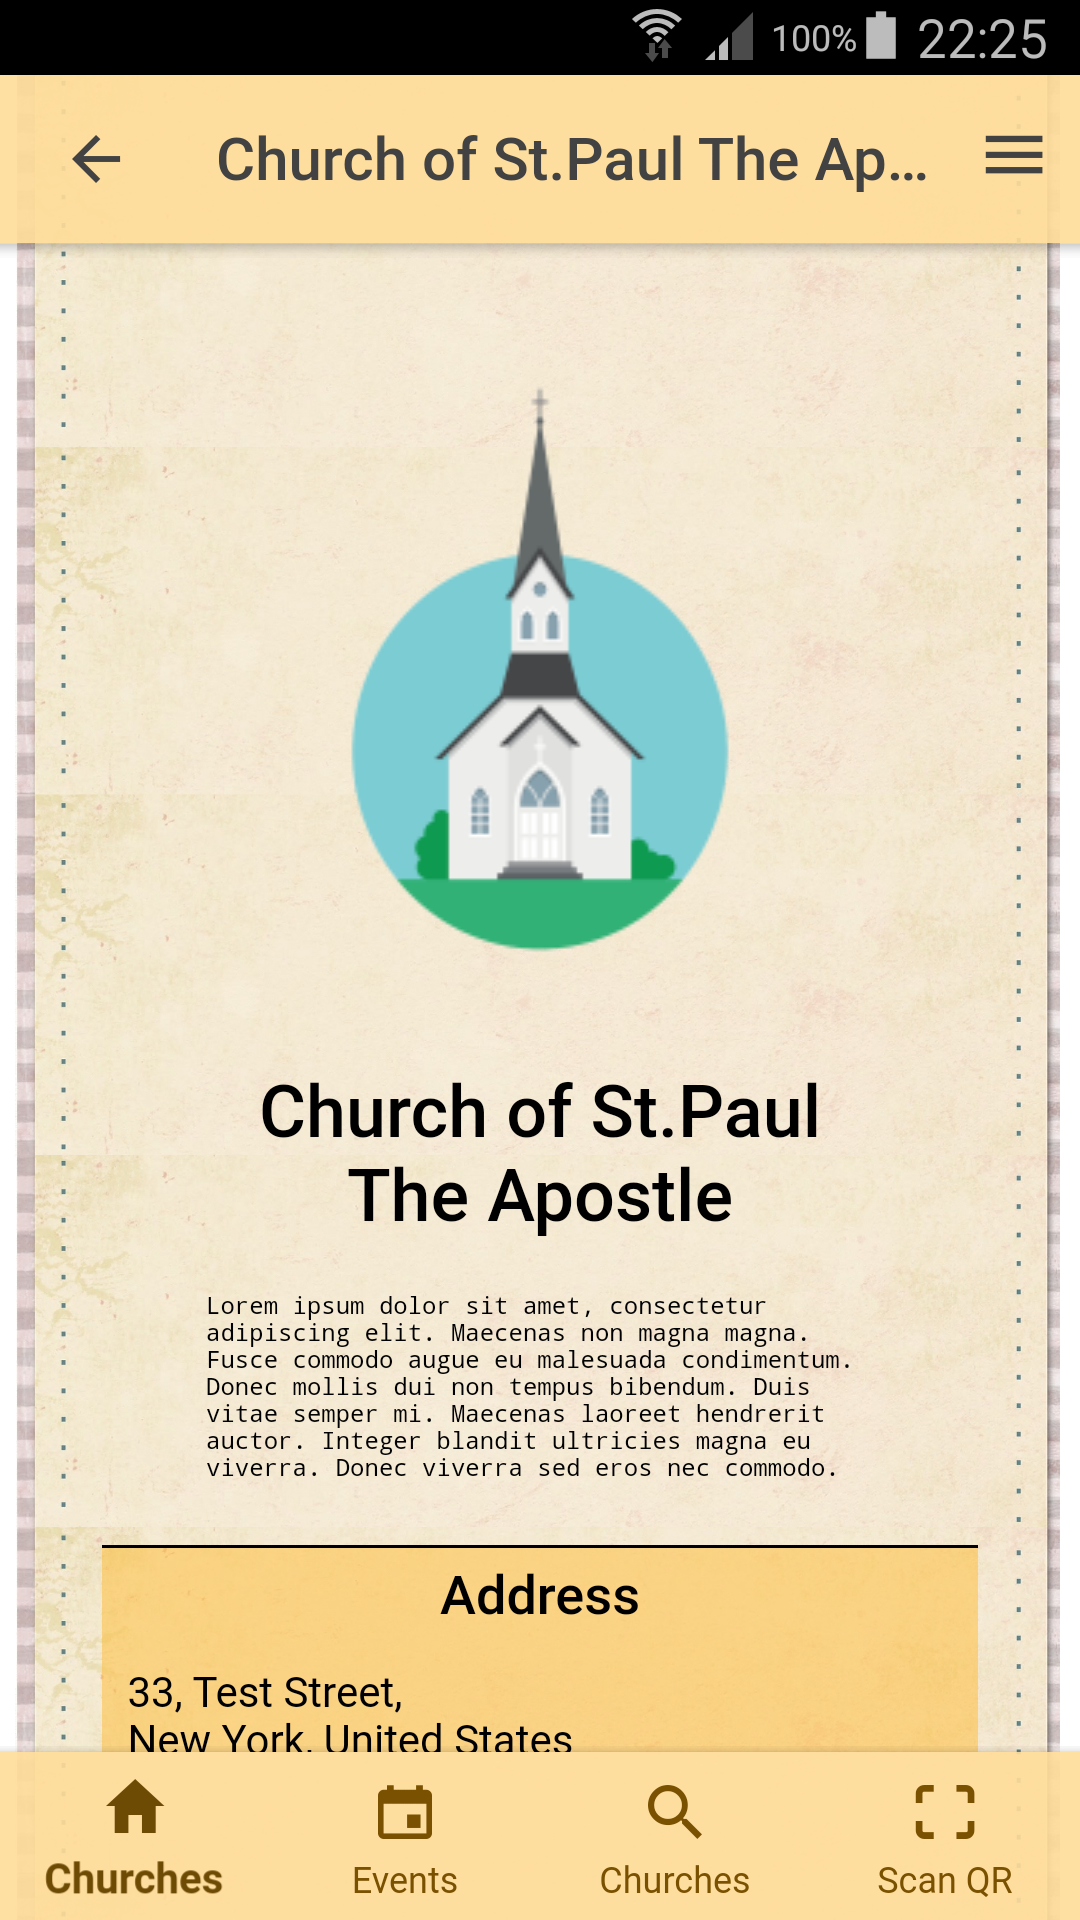 Page of one church